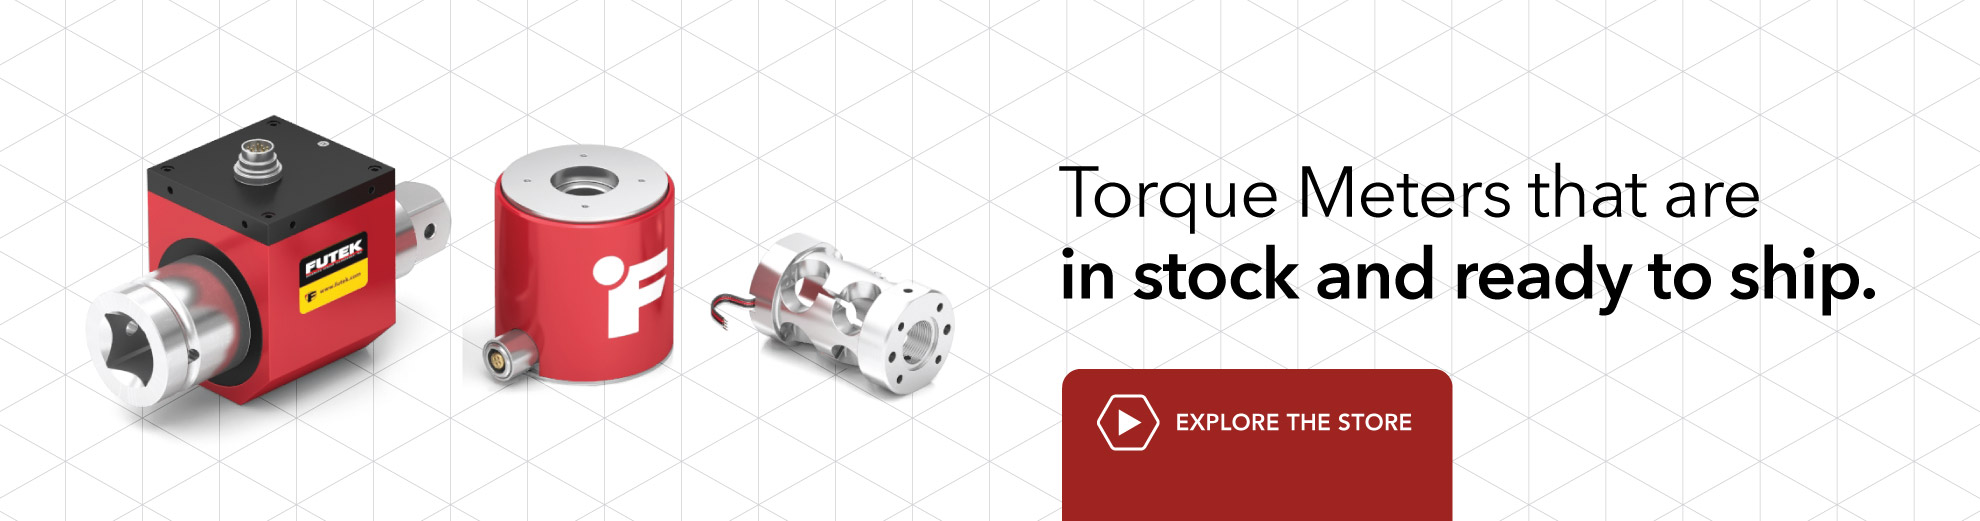 Torque Meters that are in stock and ready to ship. Explore the store